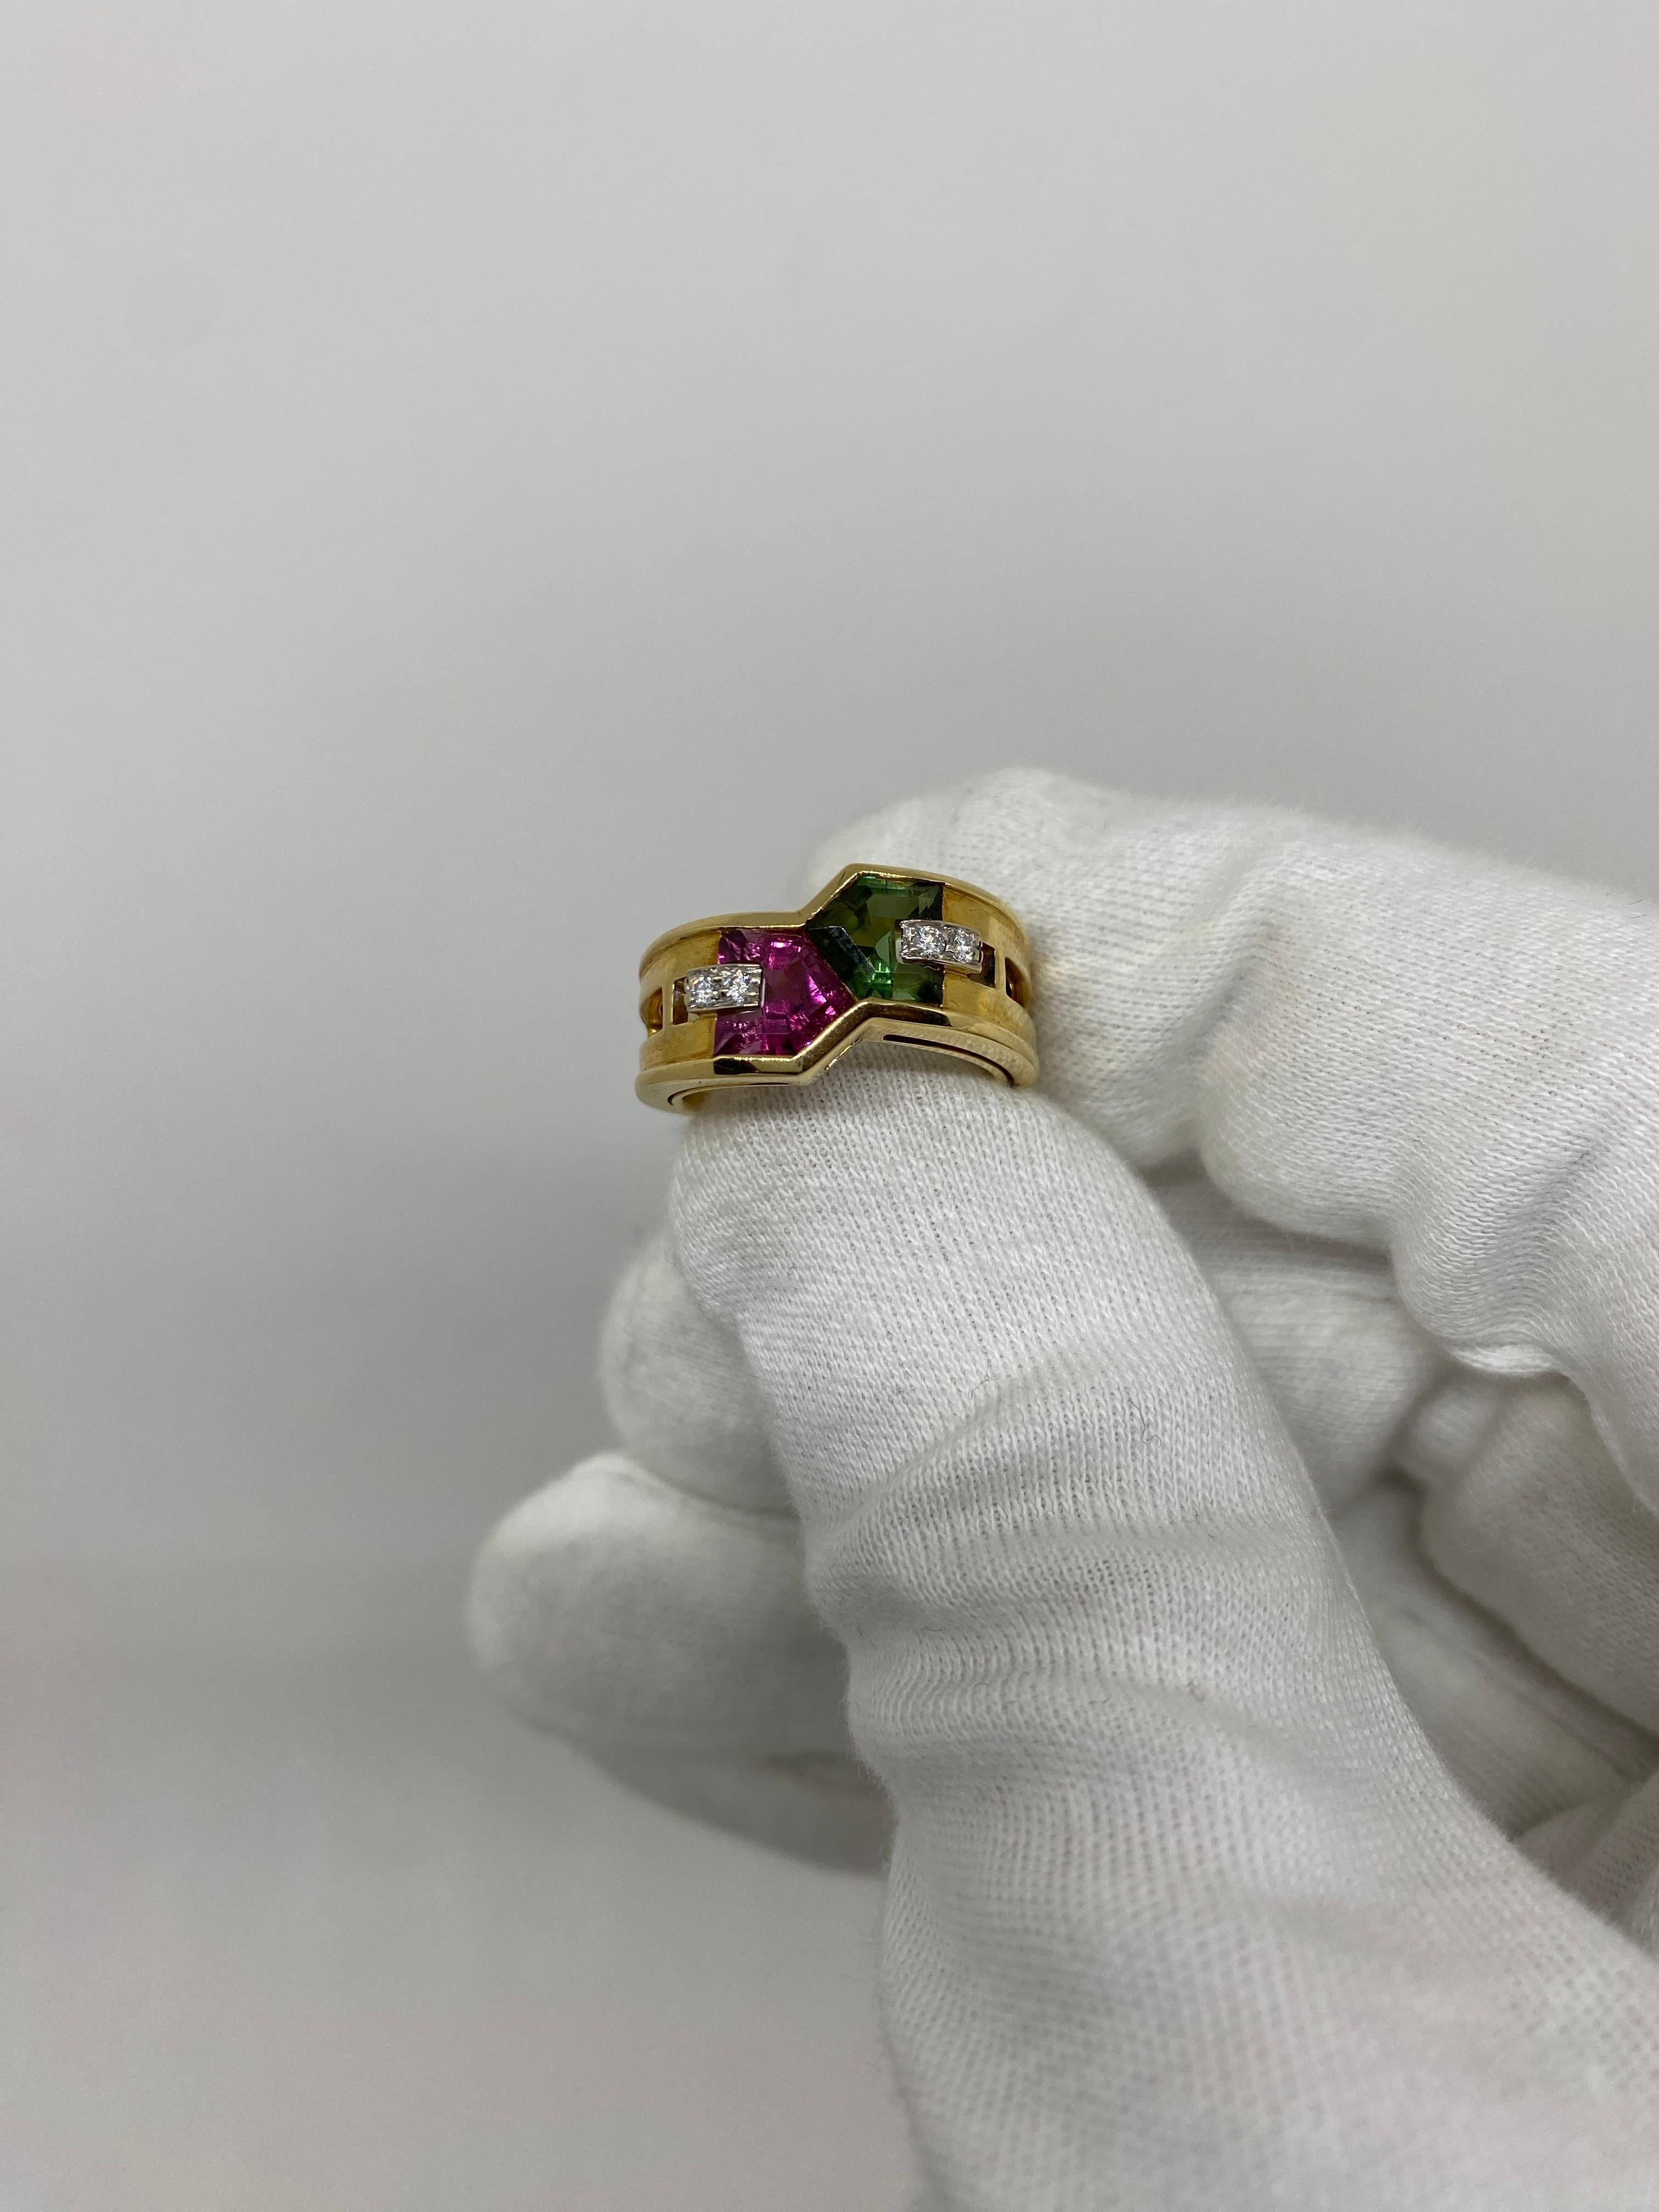 Bezel ring made of 18kt yellow gold with natural brilliant-cut white diamonds and natural tourmalines

Welcome to our jewelry collection, where every piece tells a story of timeless elegance and unparalleled craftsmanship. As a family-run business